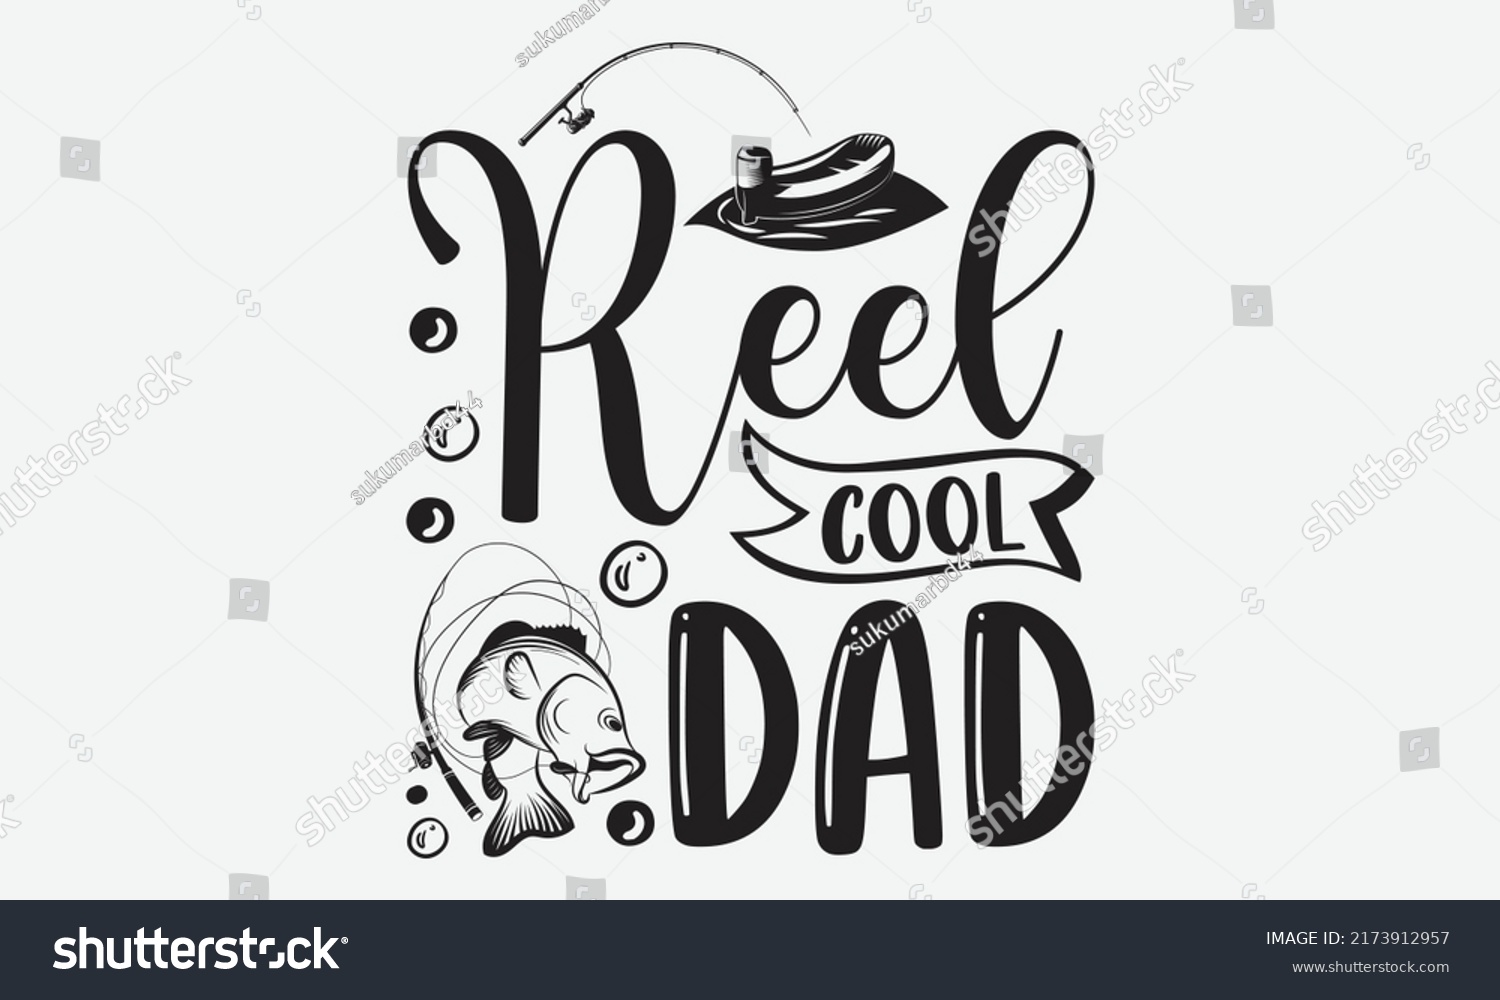 SVG of Reel cool dad - Fishing t shirt design, svg eps Files for Cutting, Handmade calligraphy vector illustration, Hand written vector sign, svg svg